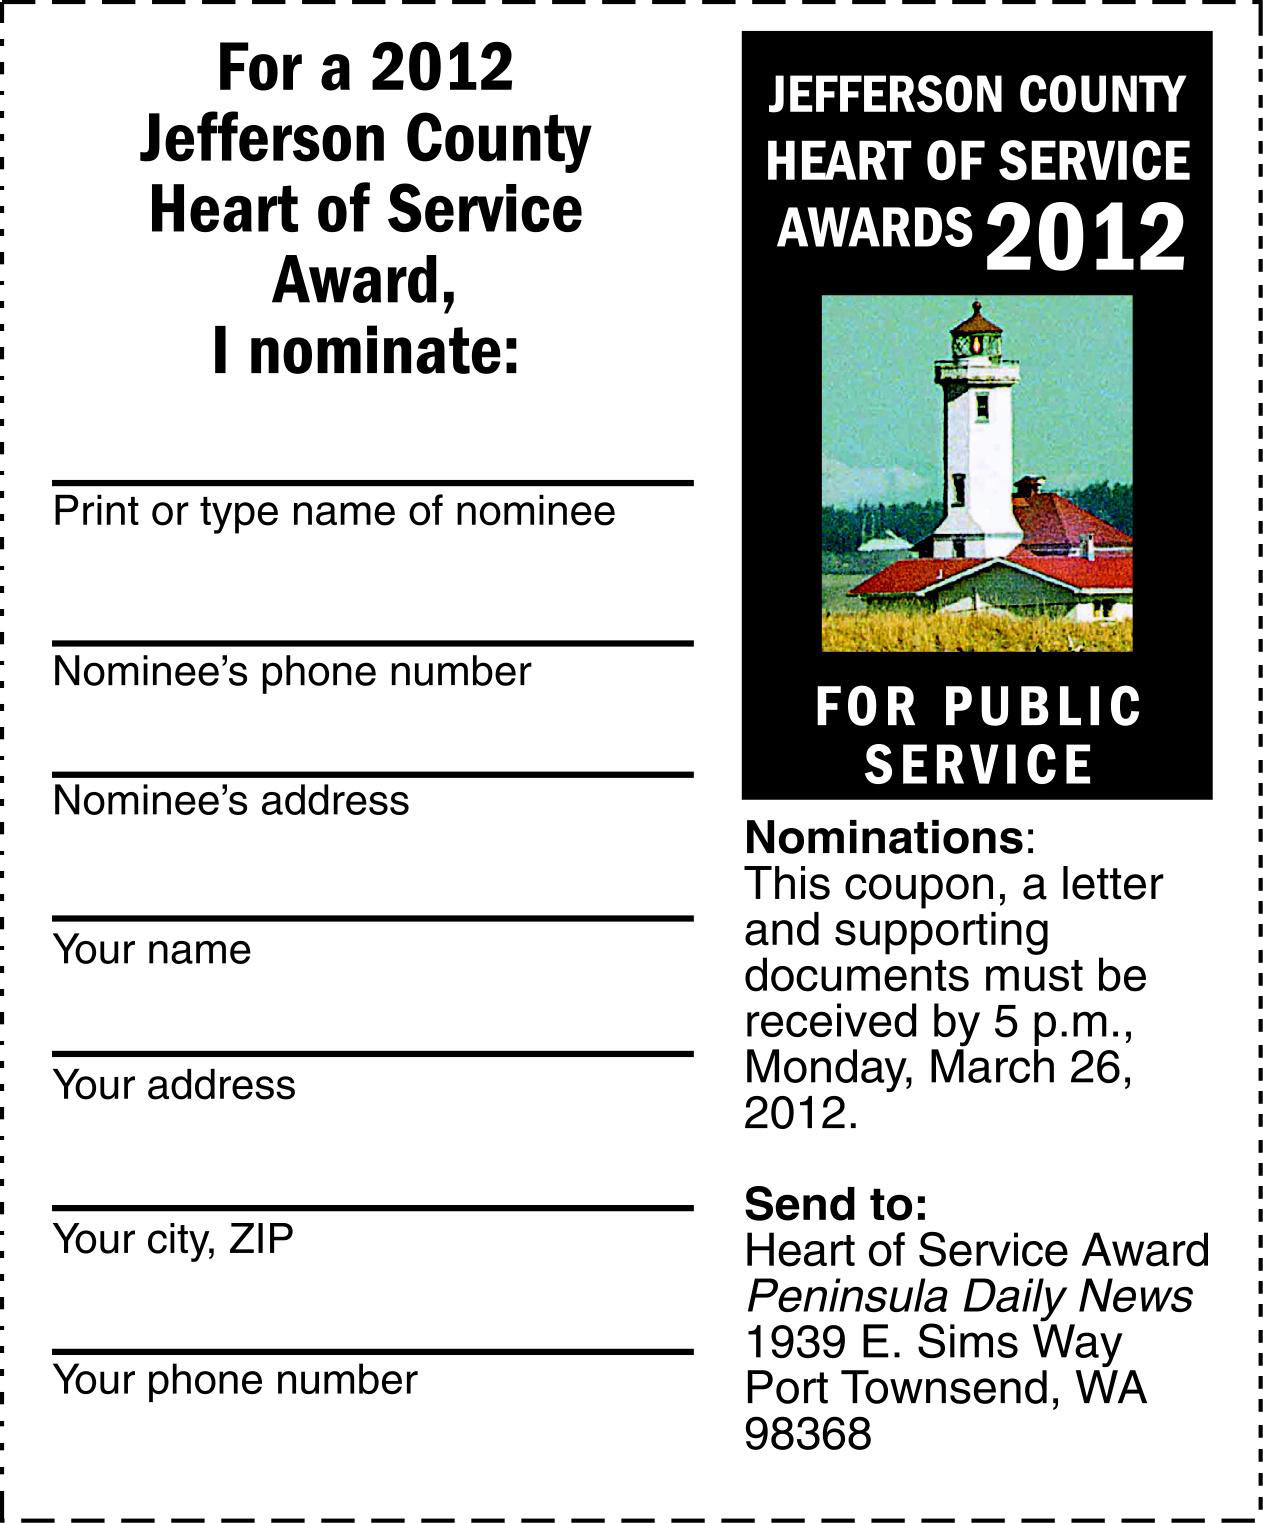 Nominate your community hero for Jefferson County Heart of Service award